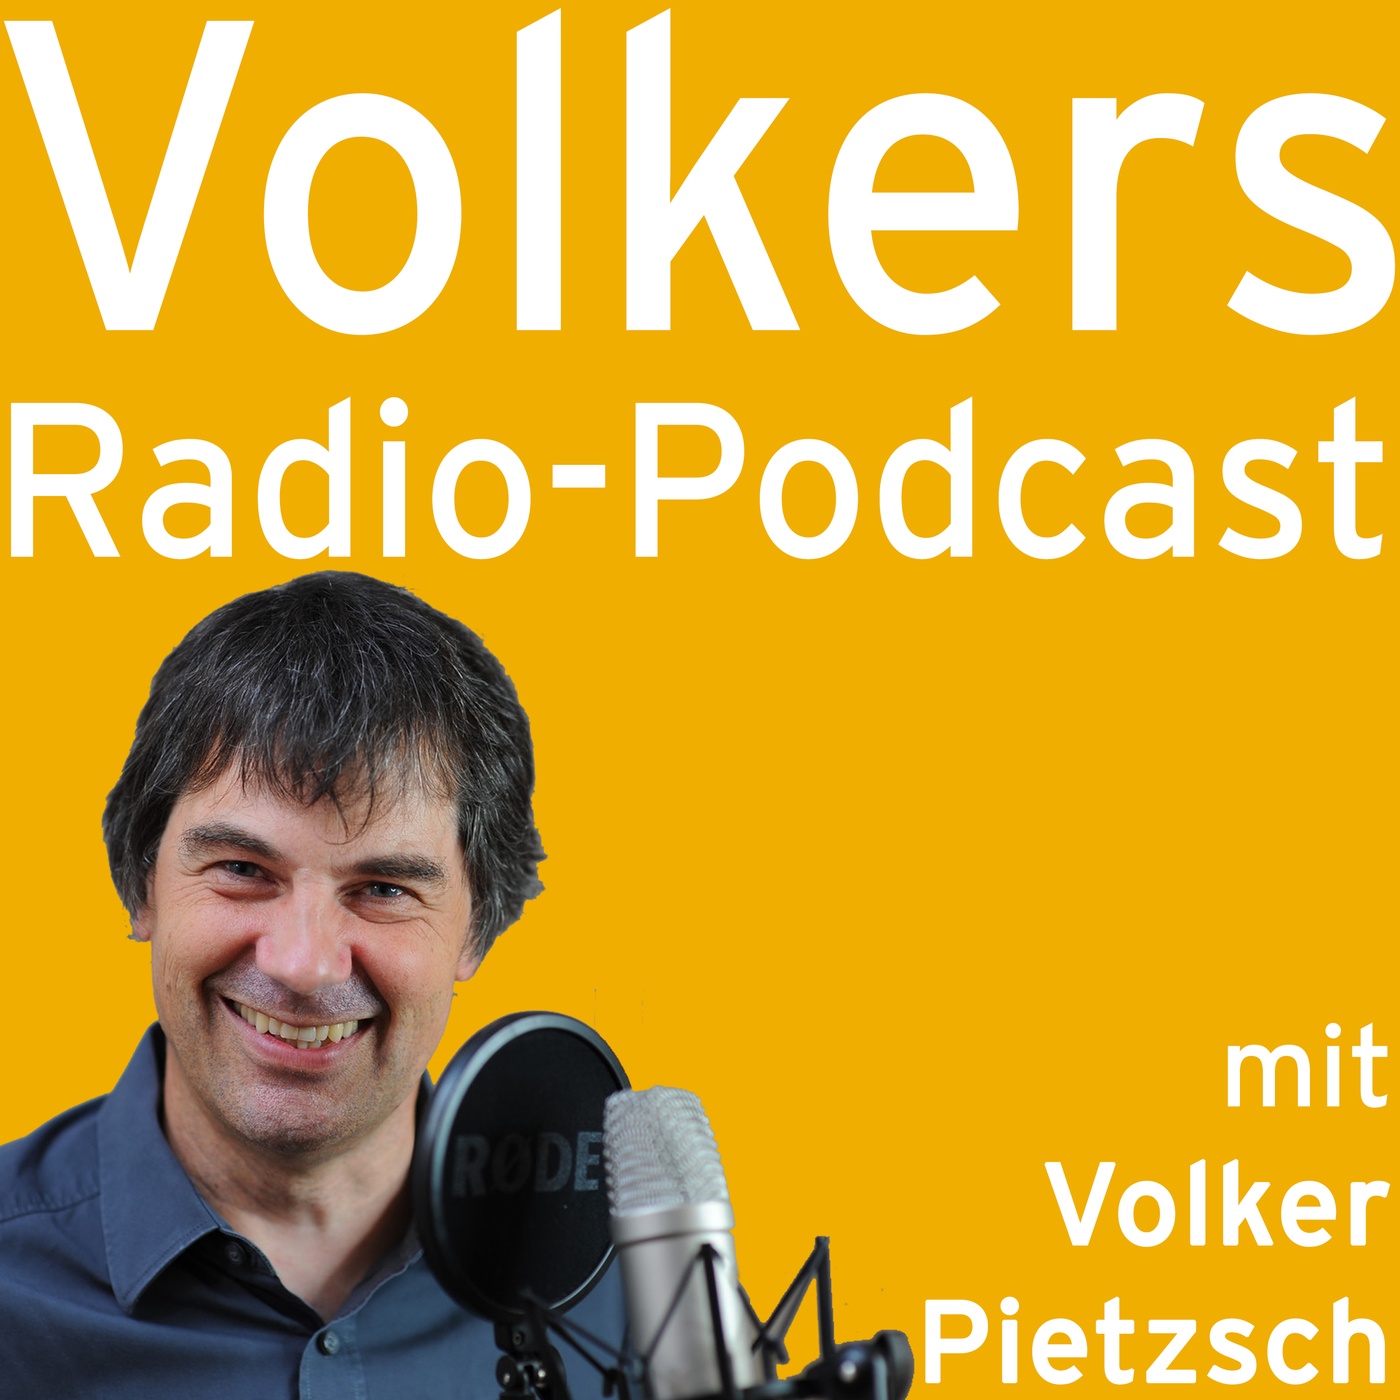 Volkers Radiopodcast